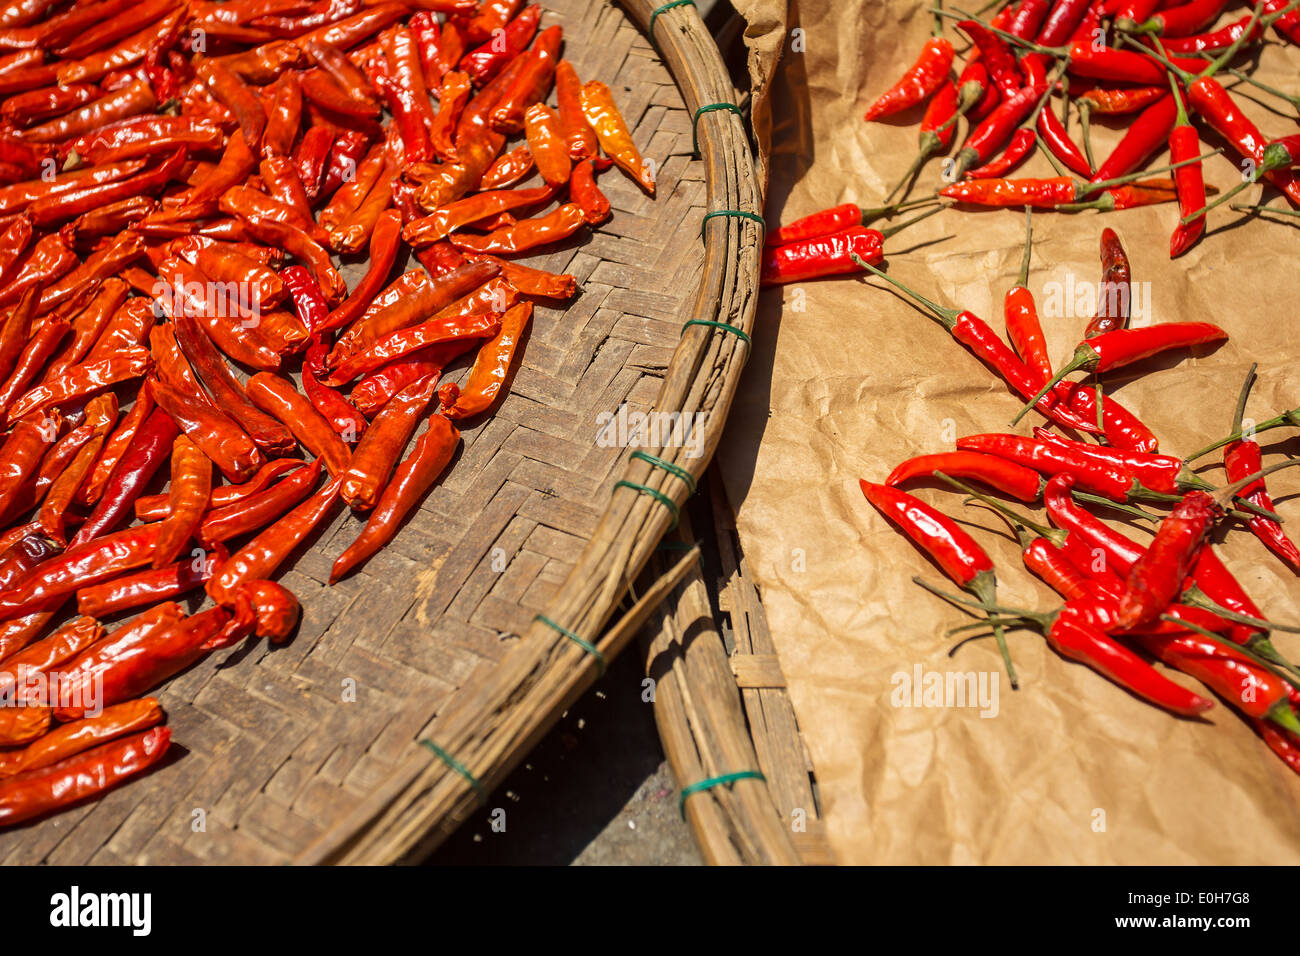 Red chilli pepper drying in the sun Stock Photo